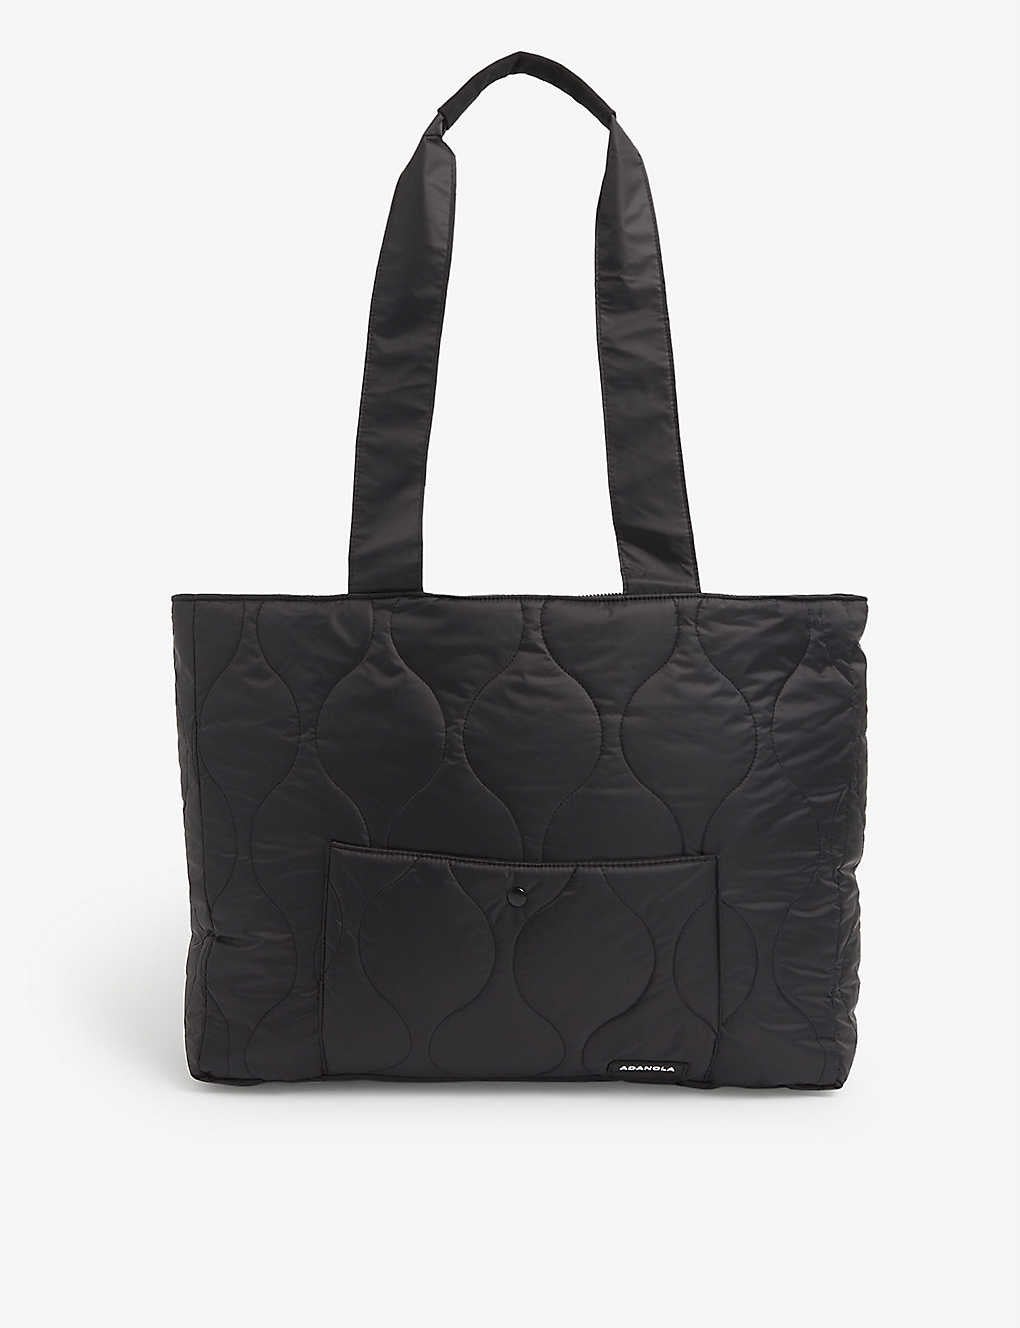 Adanola + Quilted Shell Tote Bag